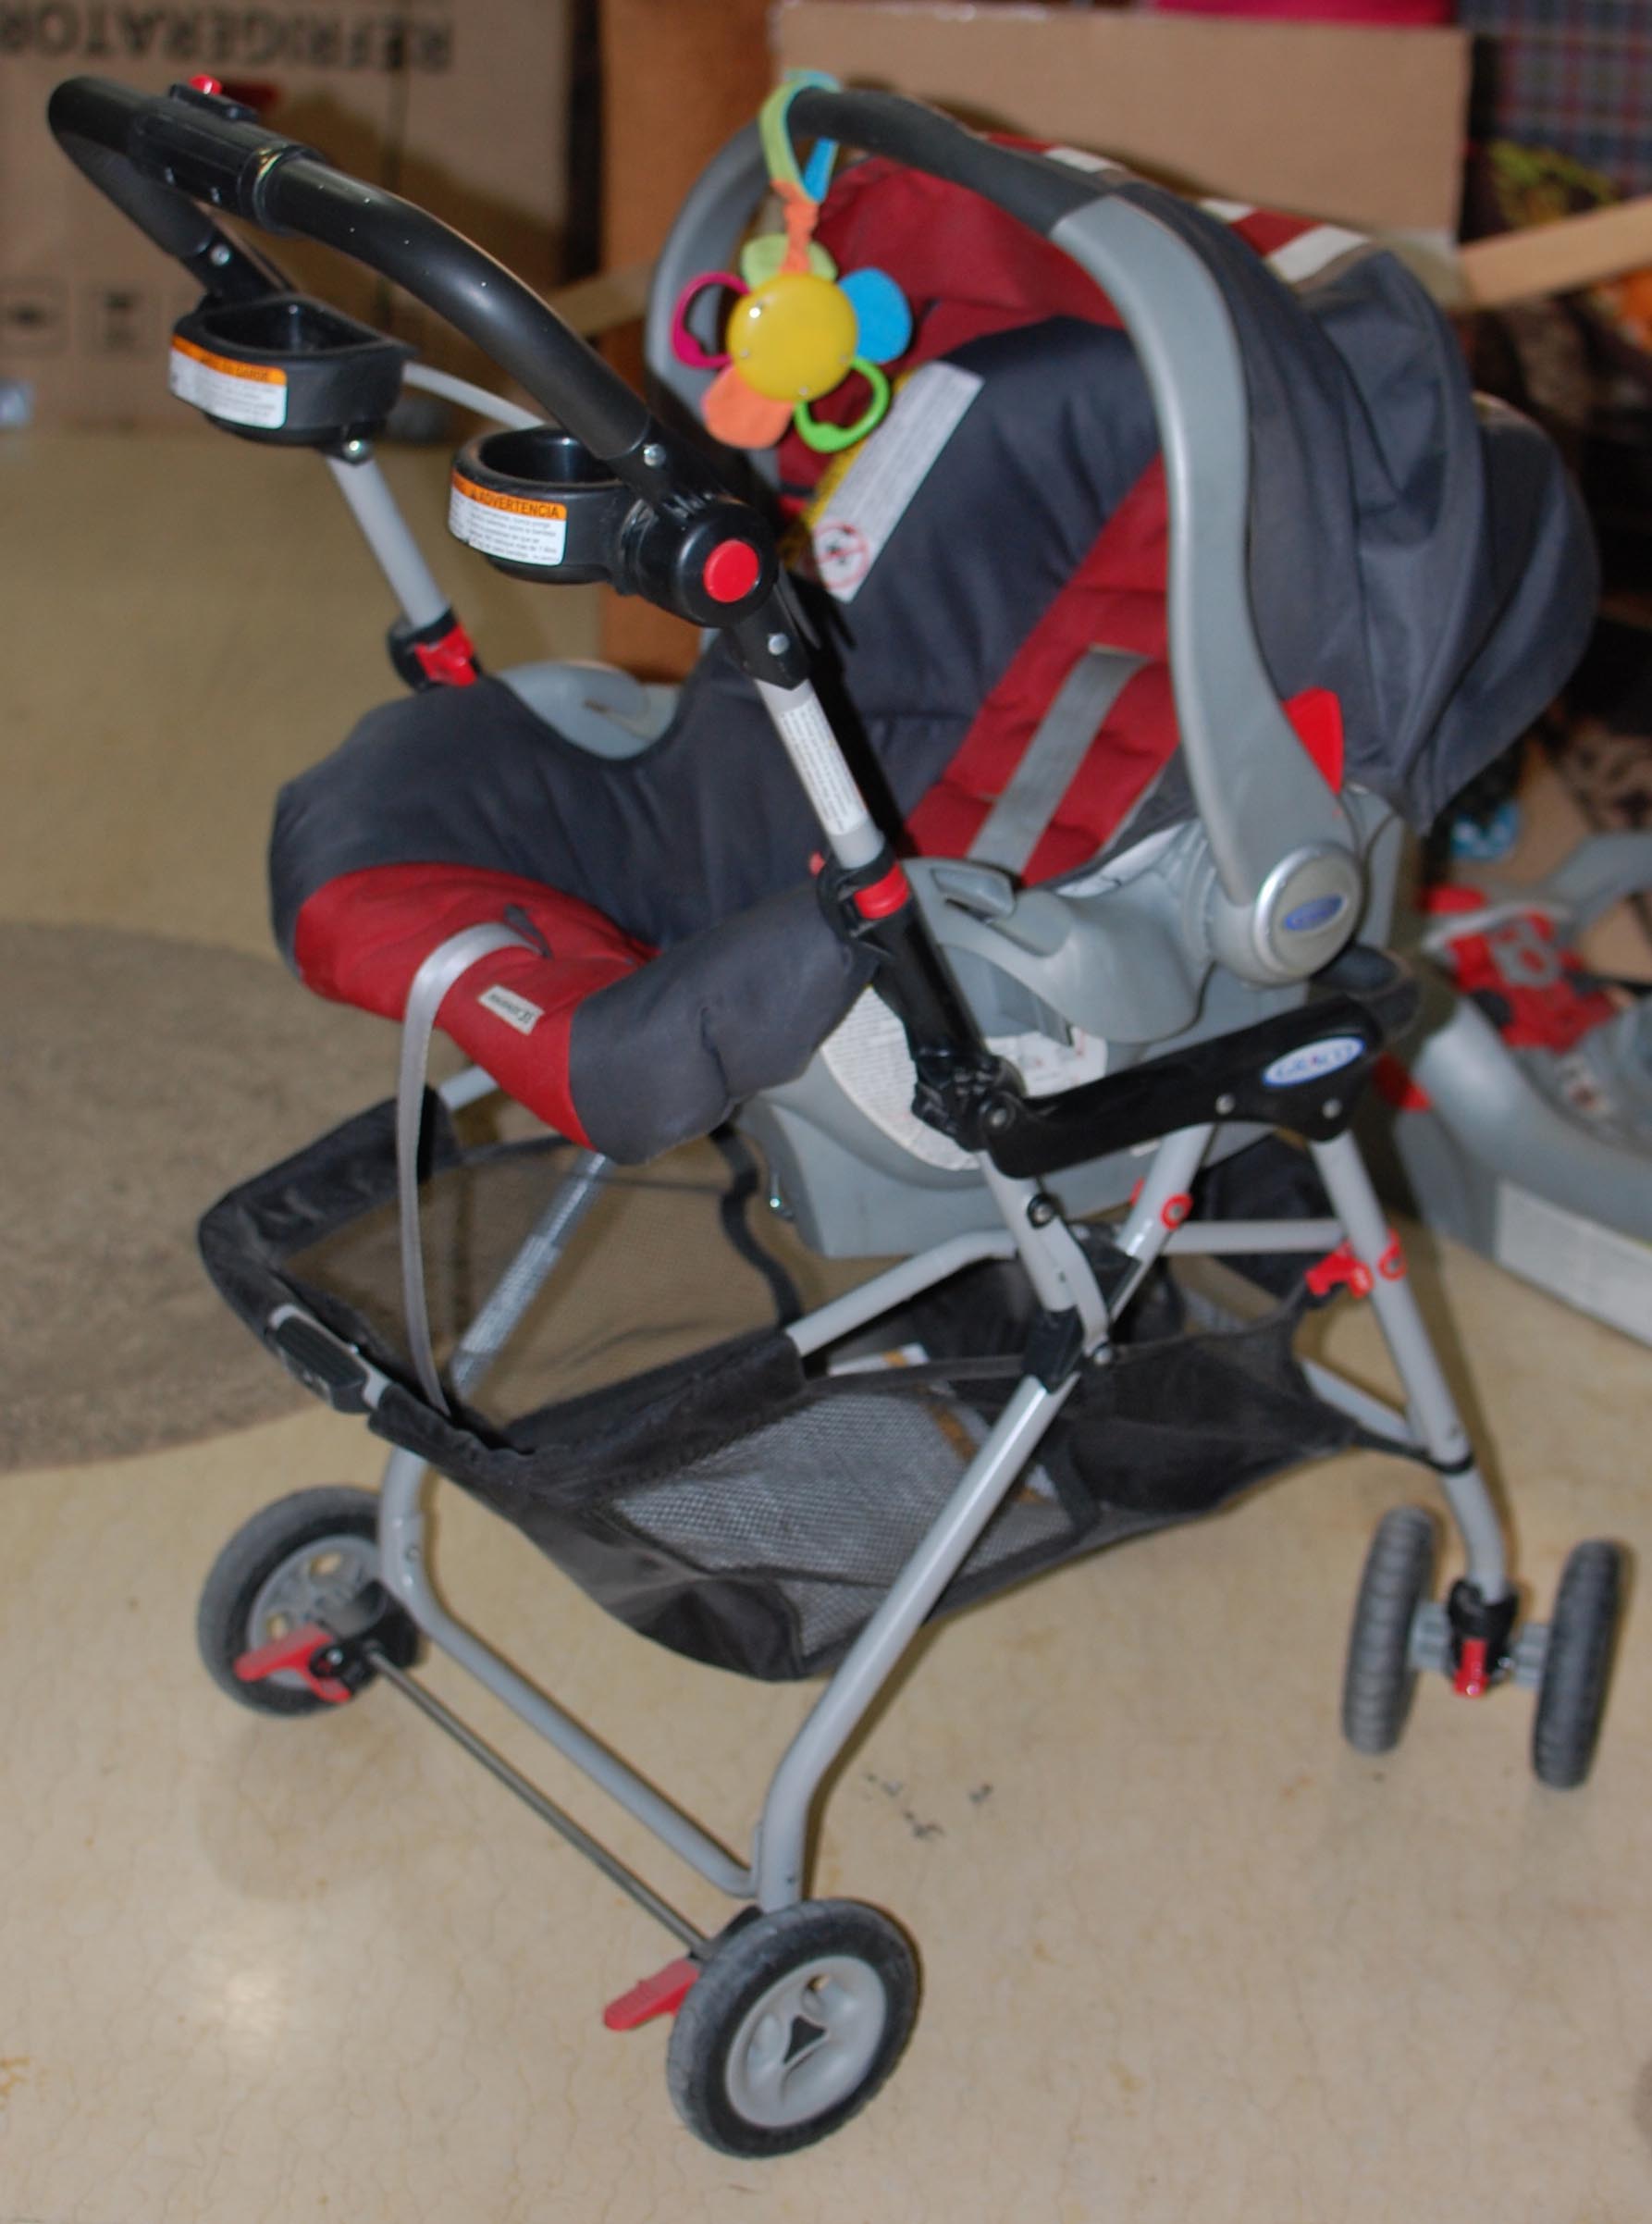 graco snap and go car seat